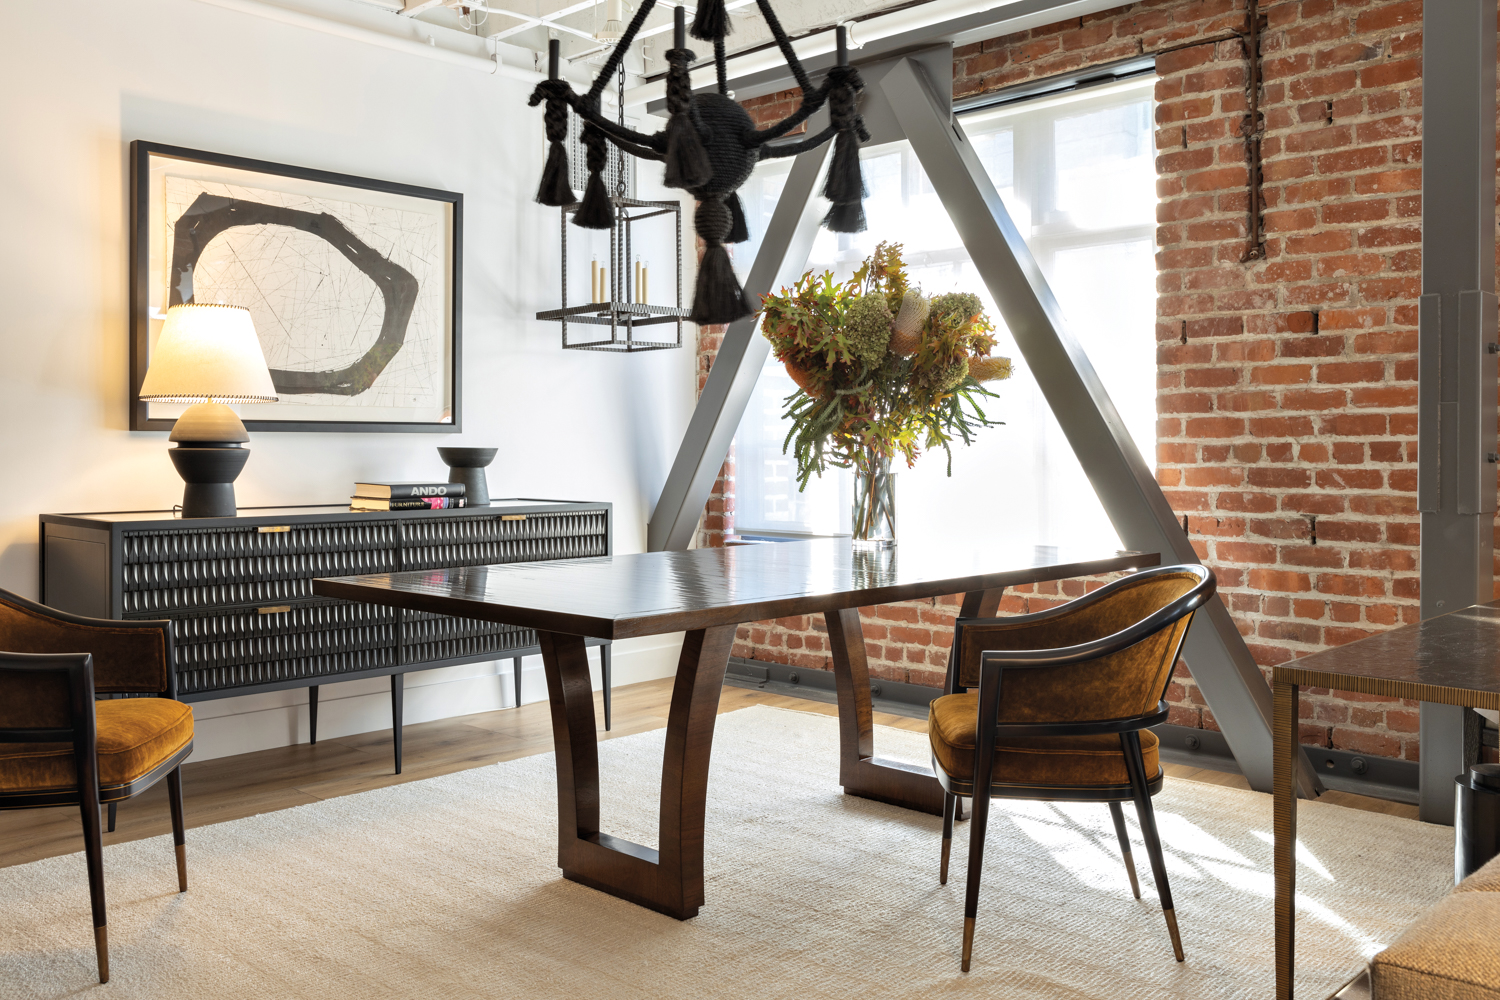 Hewn furniture showroom with black chandelier over wood dining table and chairs 